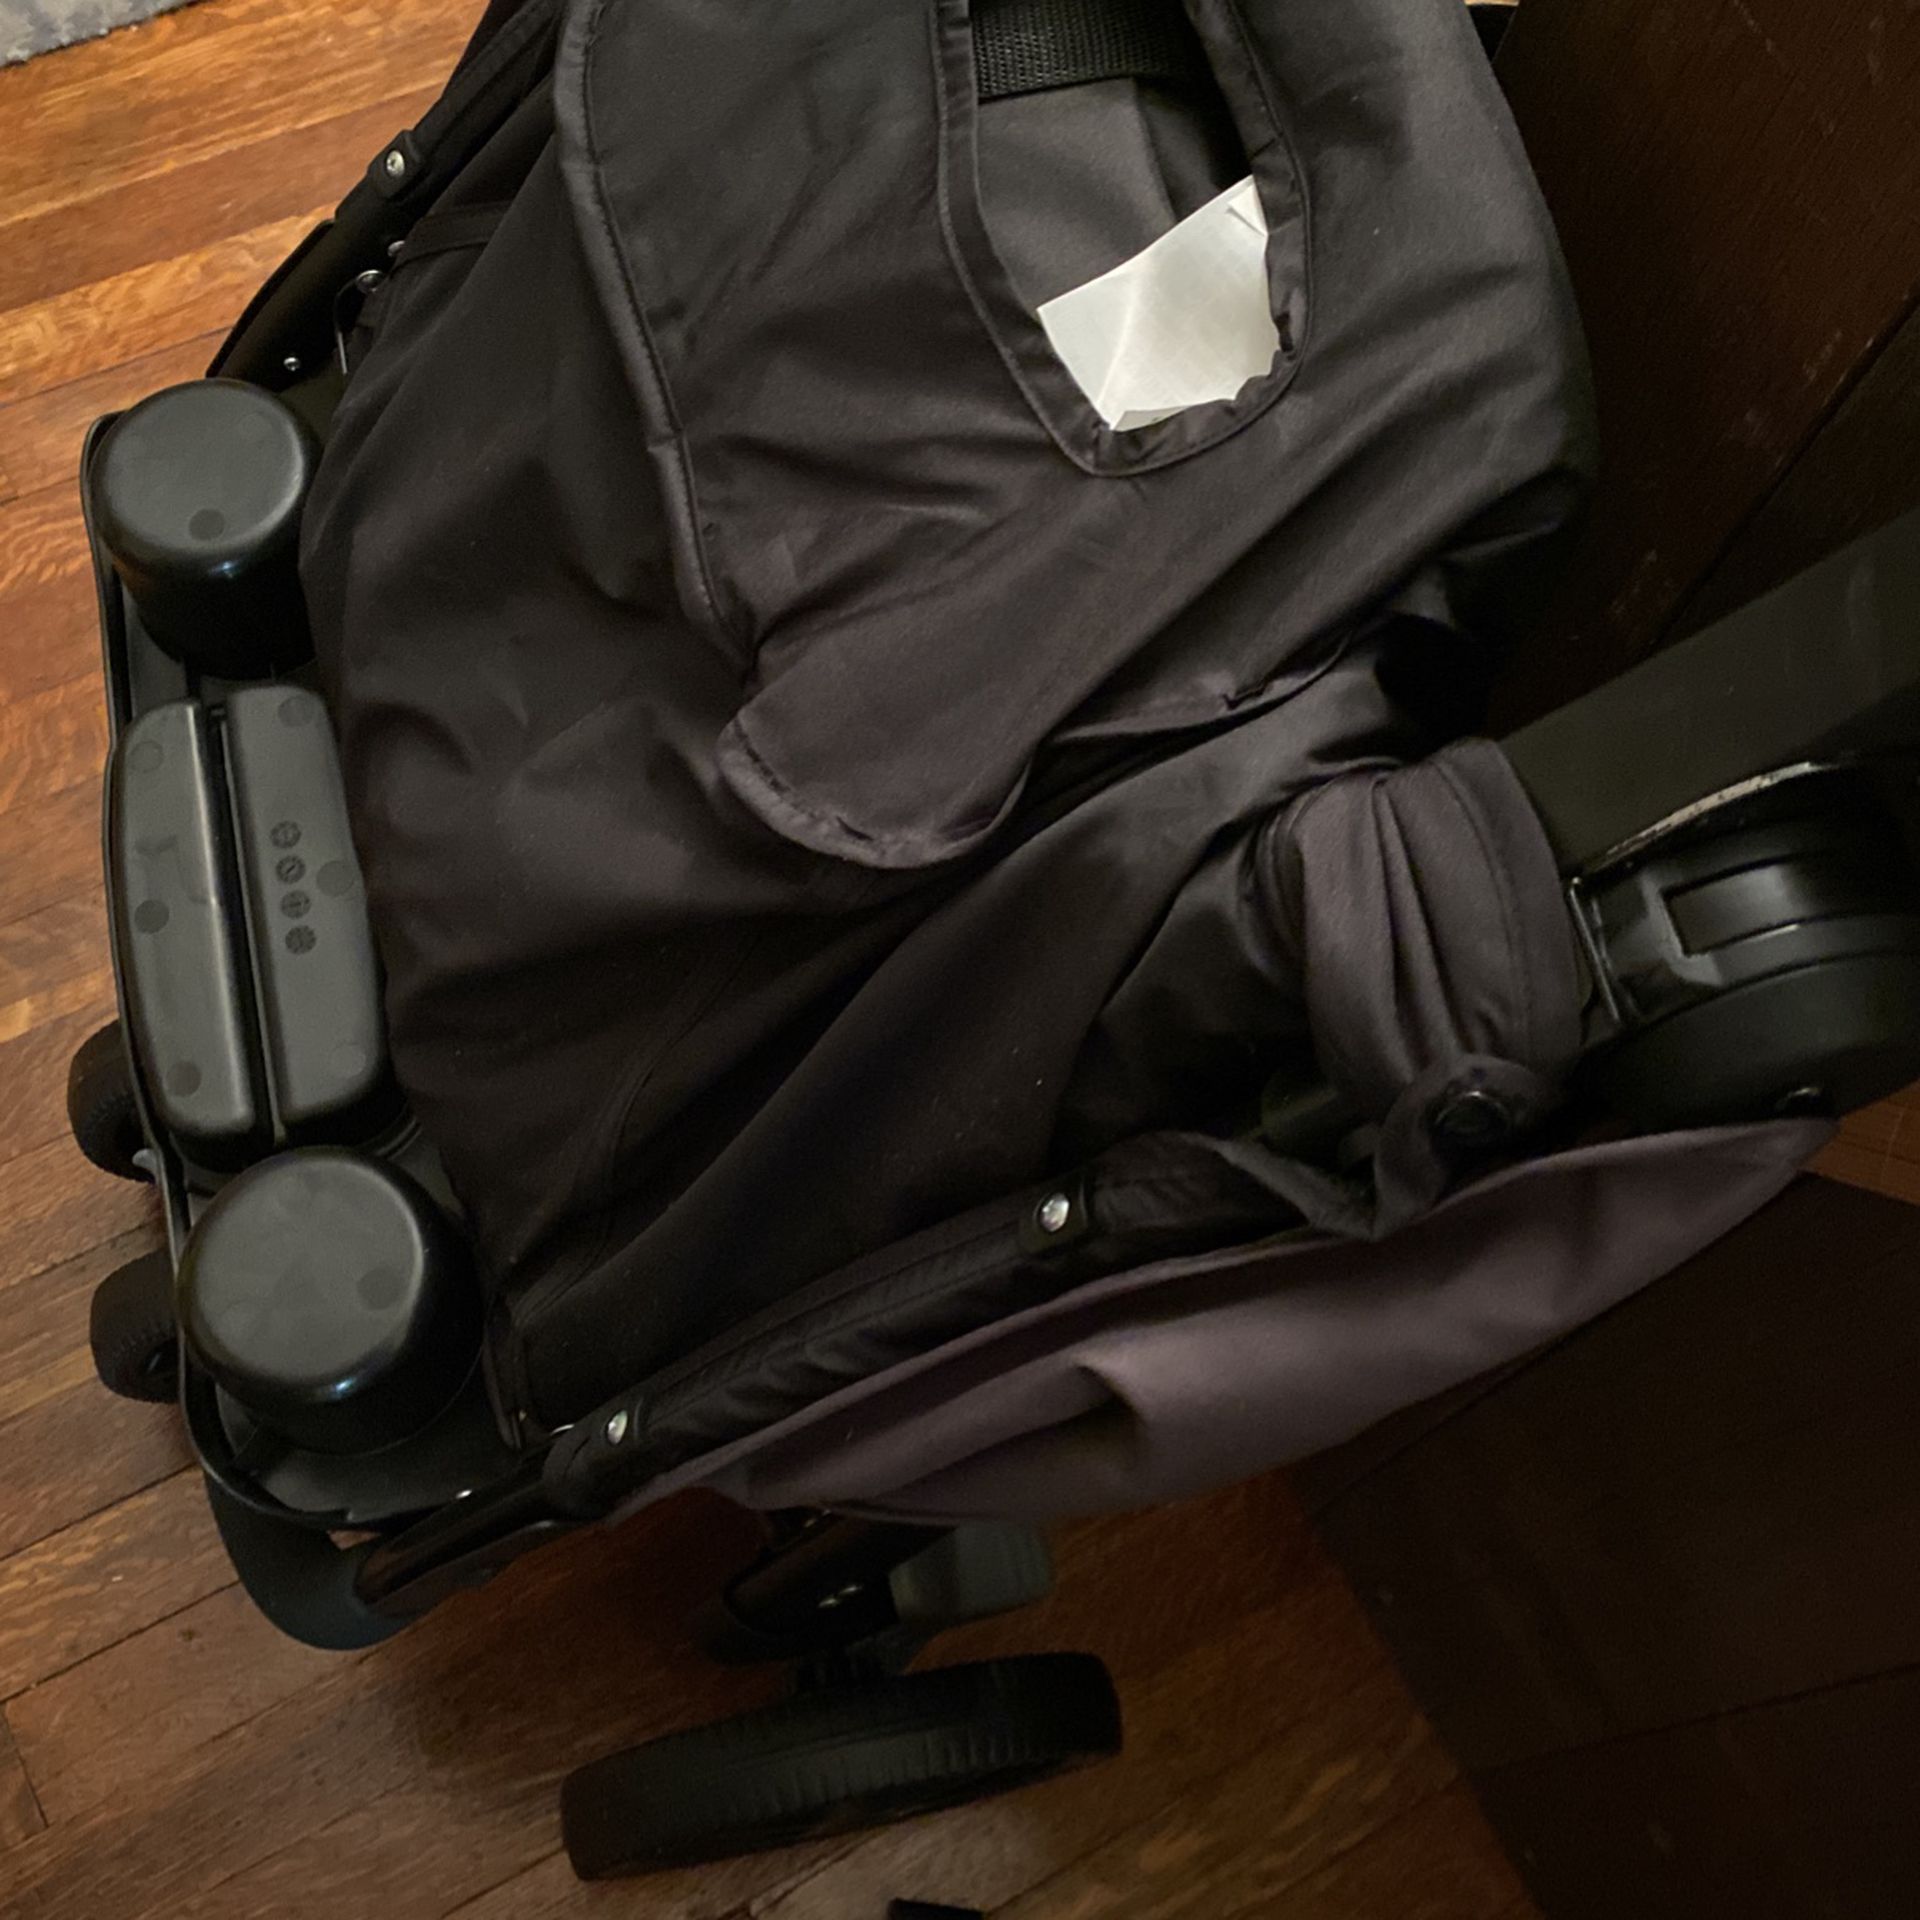 Graco Car Seat And Stroller 